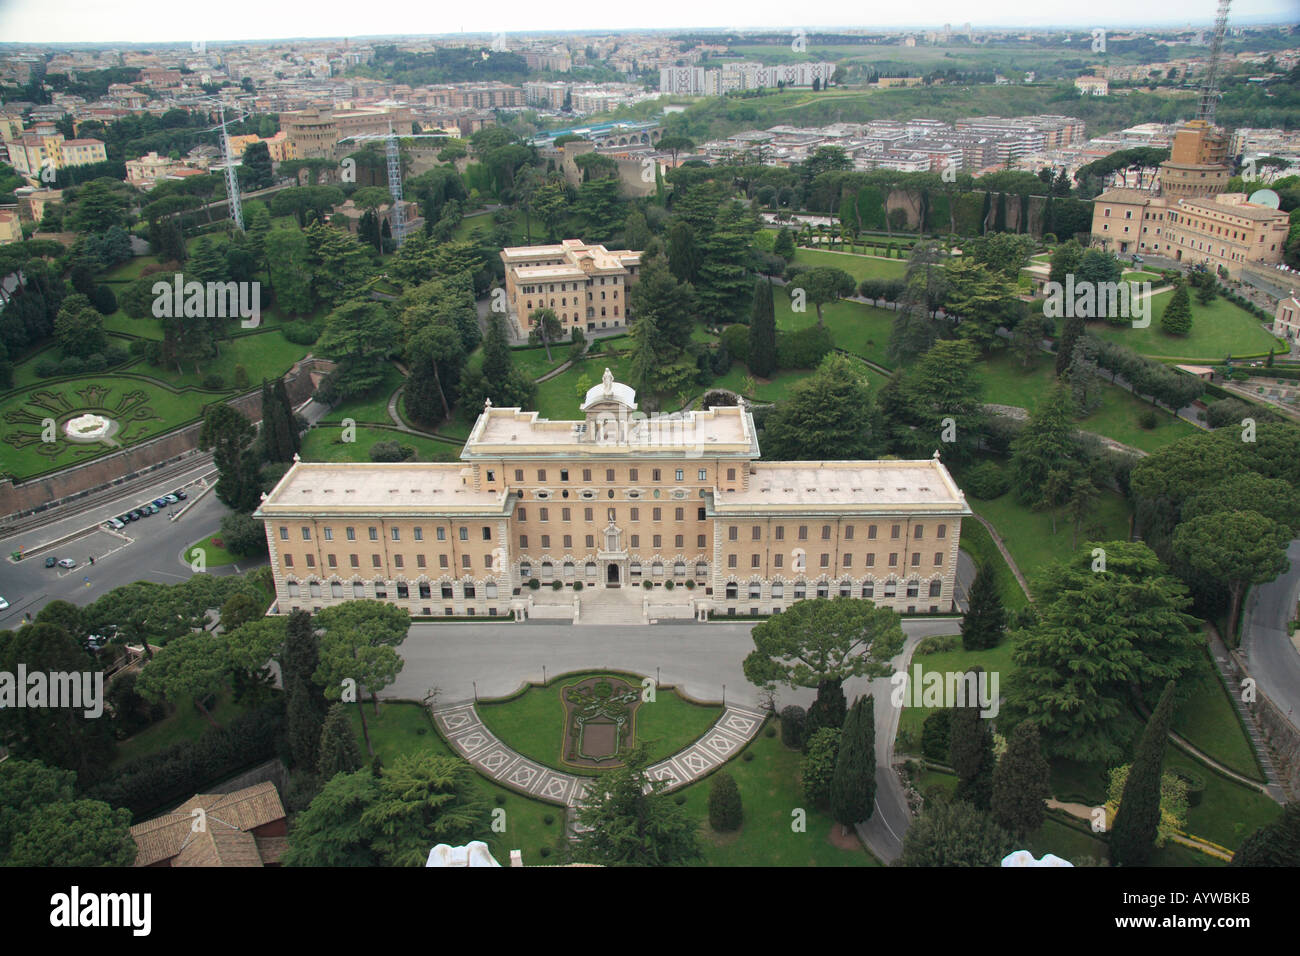 Aerial View Of The Vatican Palace And Gardens Vatican City Rome